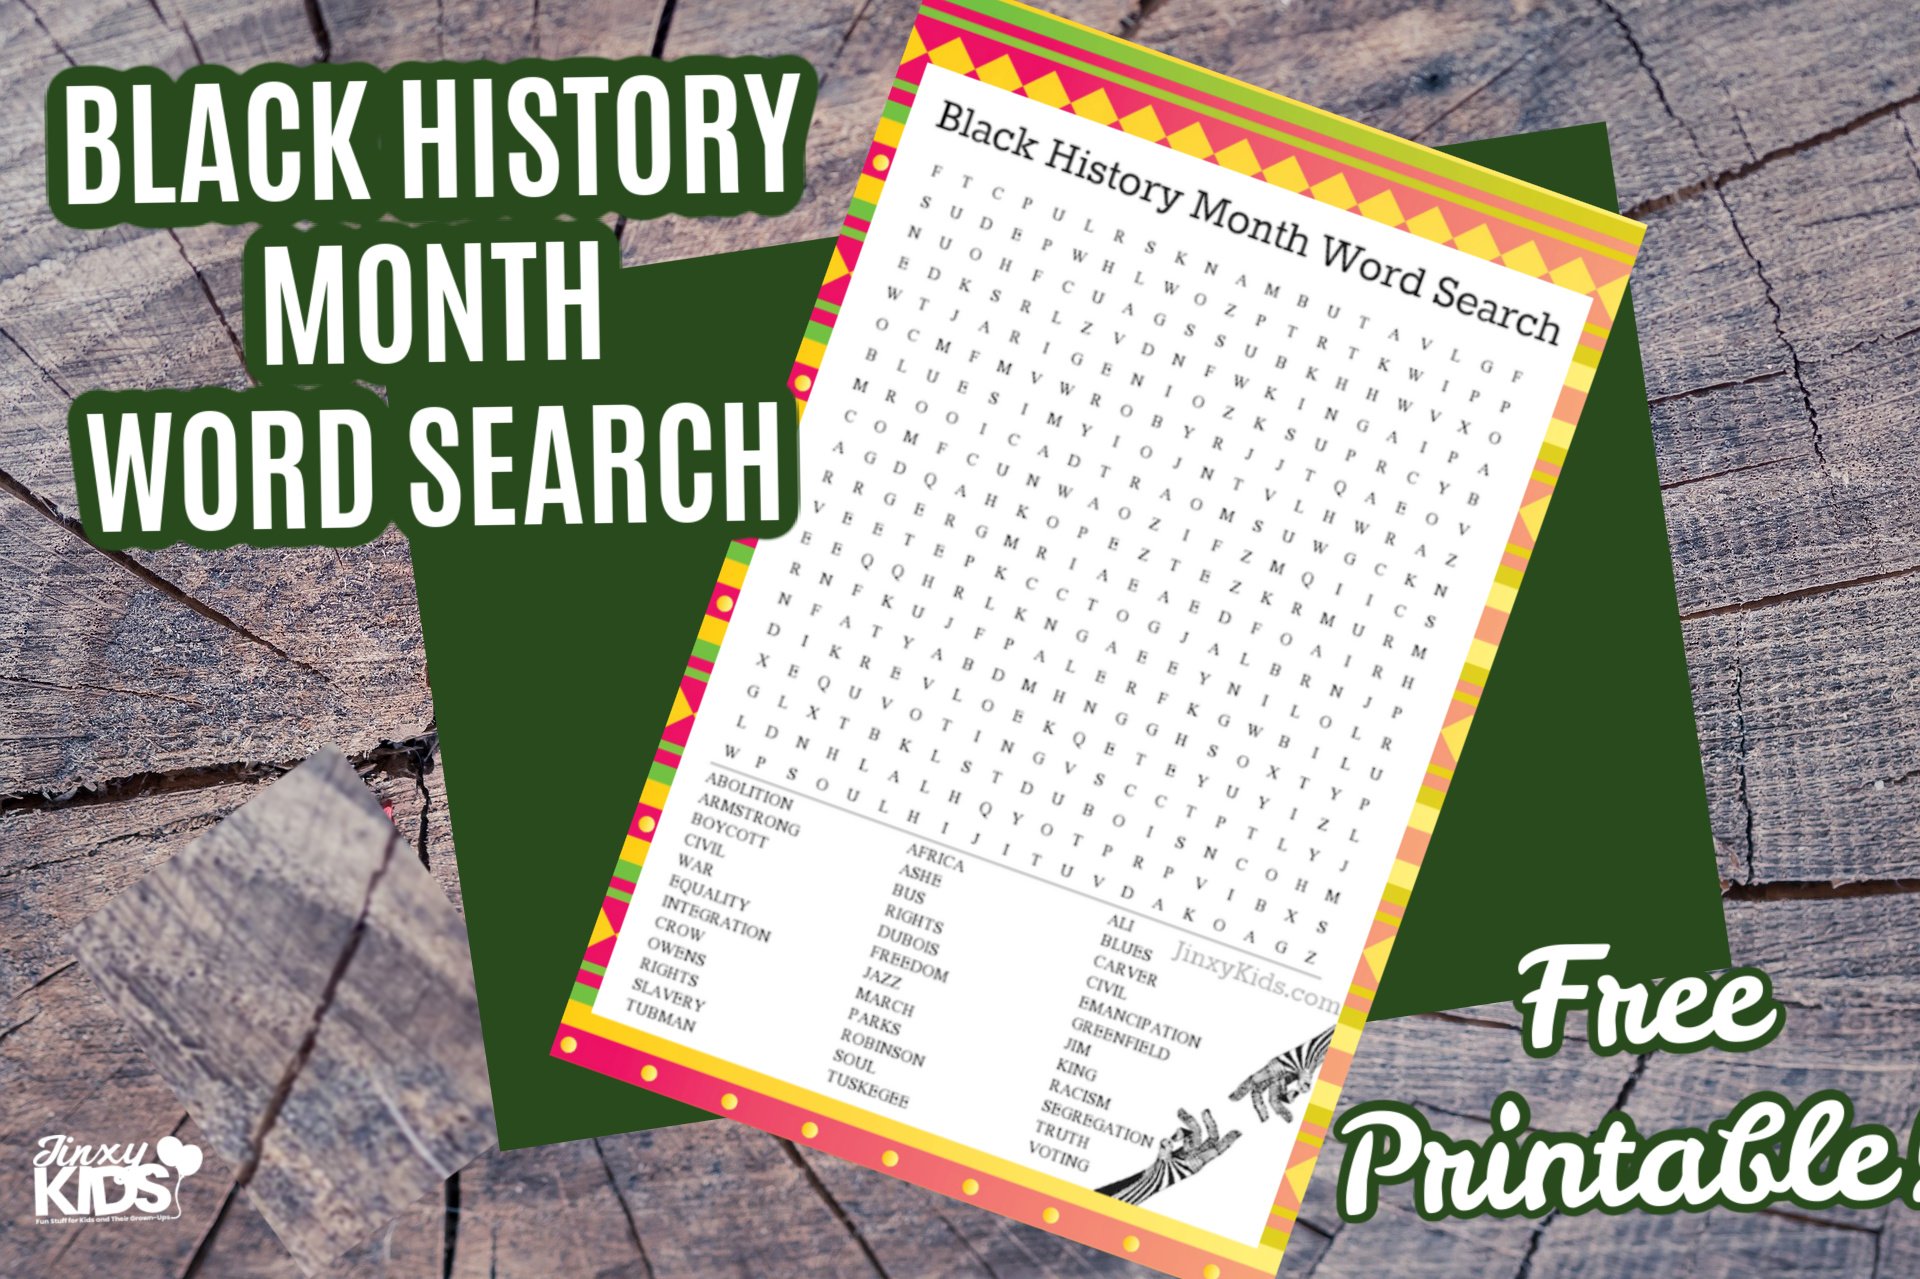 Black History Month Word Search Puzzle